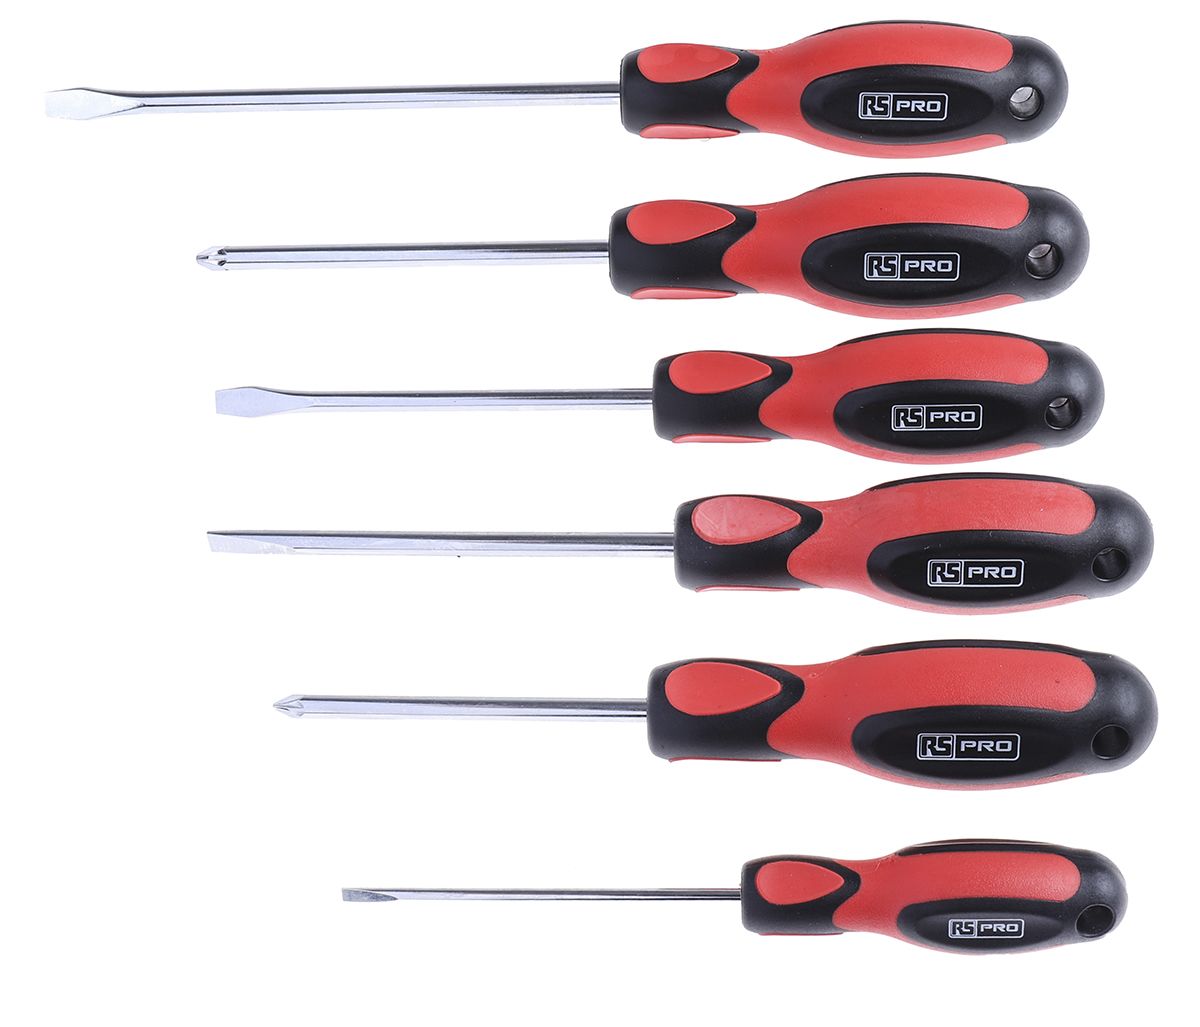 RS PRO Engineers Slotted Parallel' Slotted Flared' Pozidriv Screwdriver Set 6 Piece